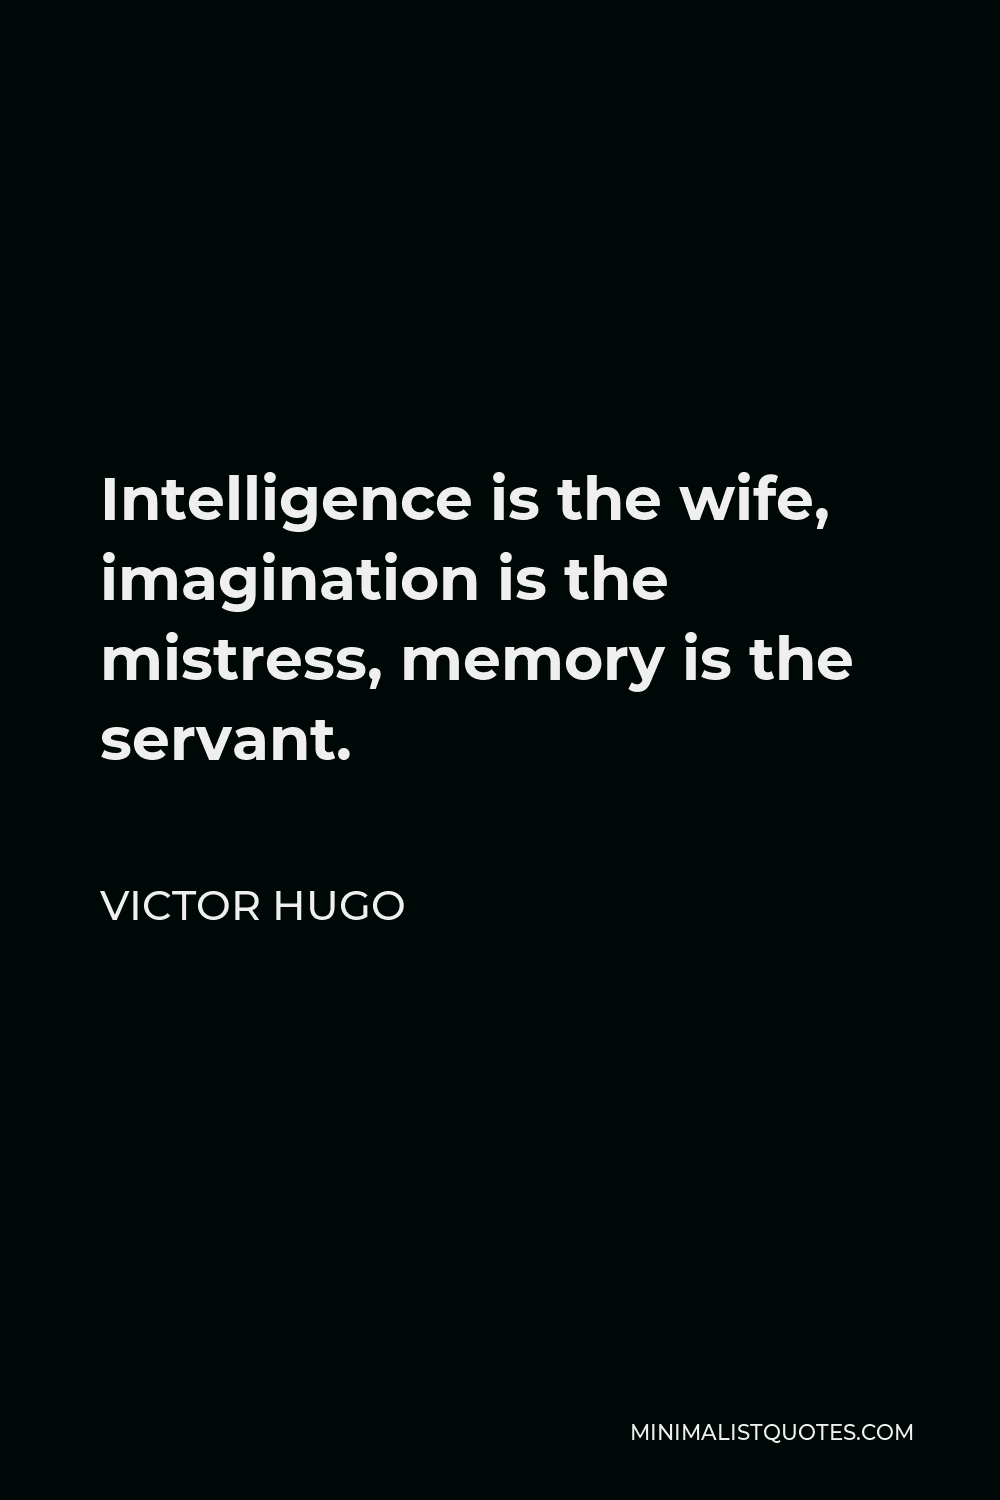 Victor Hugo Quote - Intelligence is the wife, imagination is the mistress, memory is the servant.